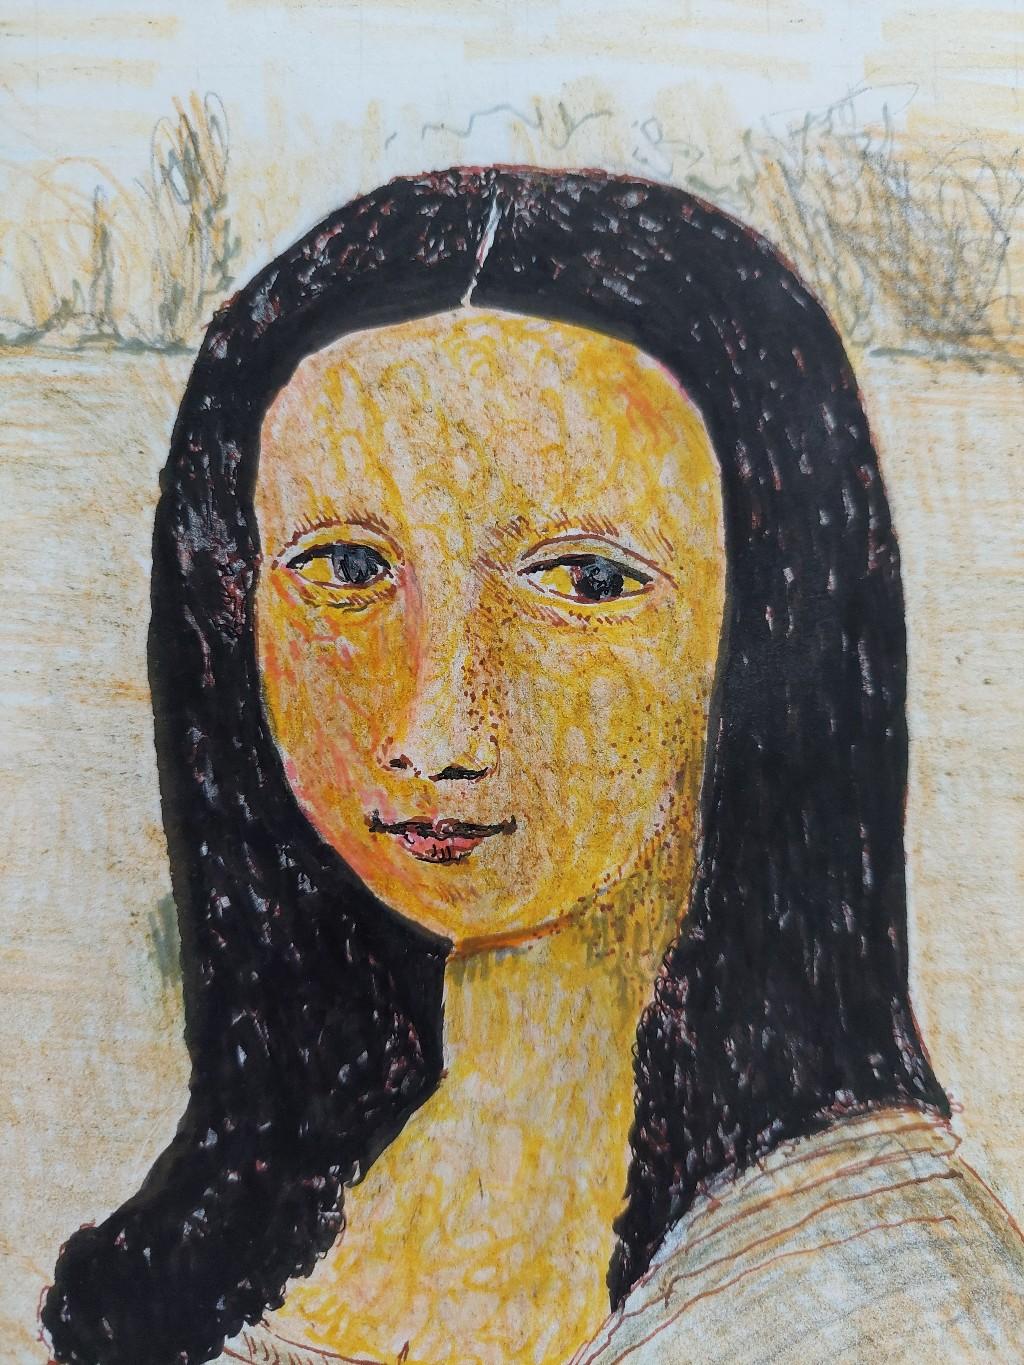 Other 20th Century French Modernist Cubist Painting, Mona Lisa Study  For Sale